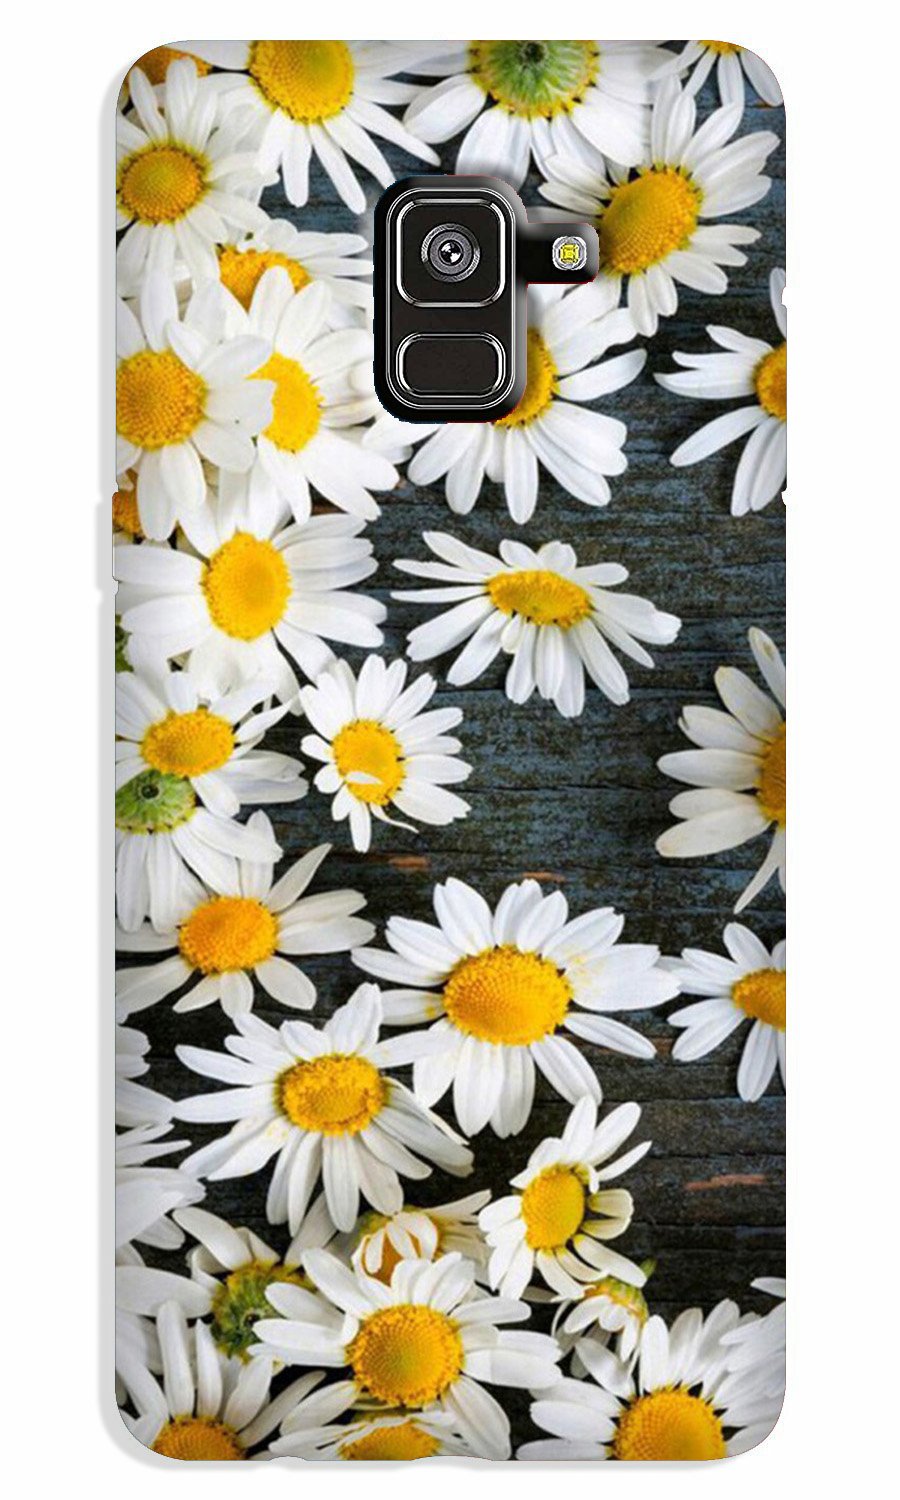 White flowers2 Case for Galaxy A6